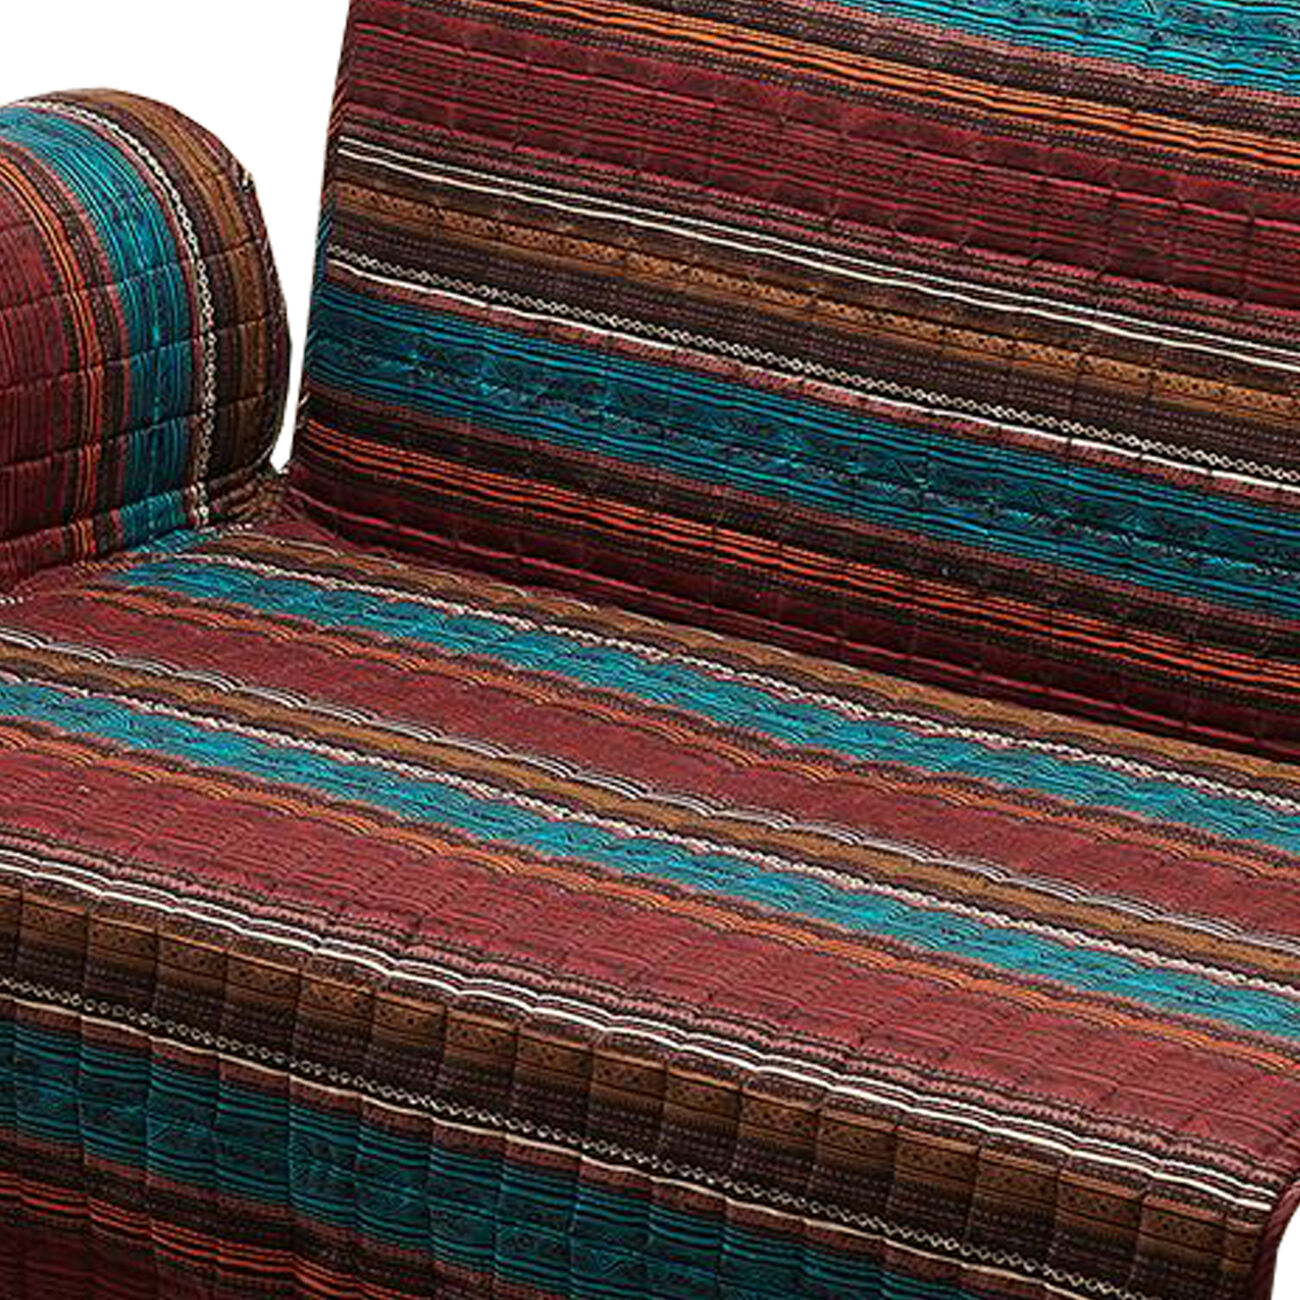 Oka Fabric Loveseat Protector with Striped Pattern, Brown and Orange